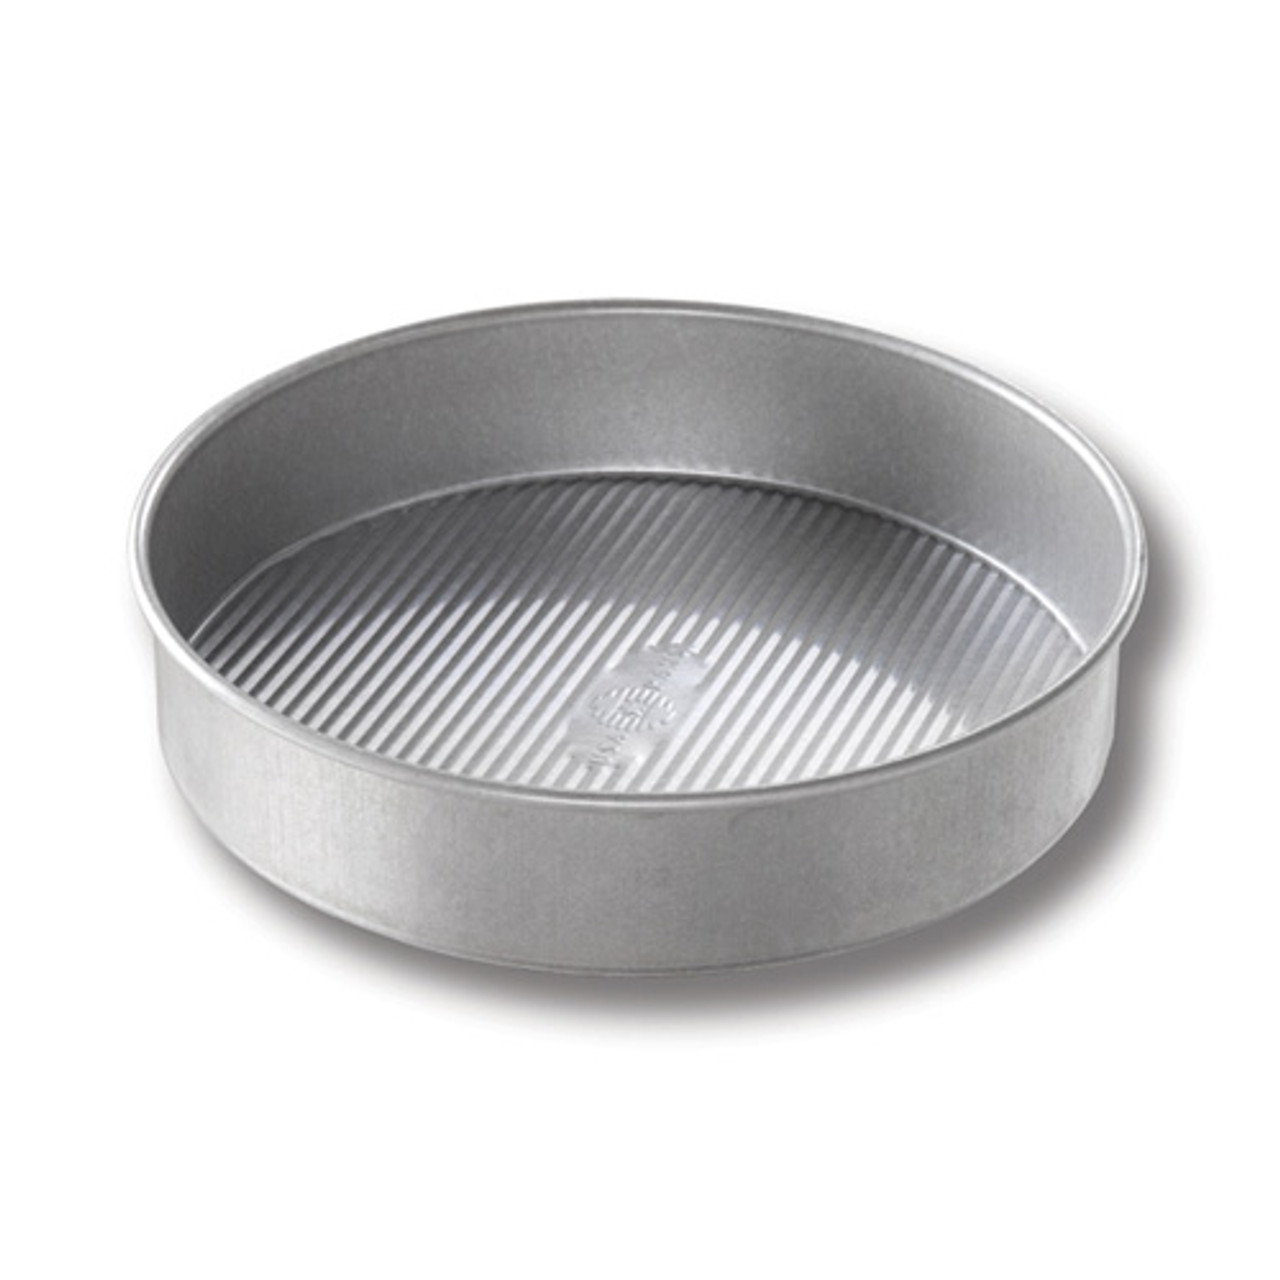 Buy Good Cook 9 Inch Round Cake Pan Online at Low Prices in India -  Amazon.in